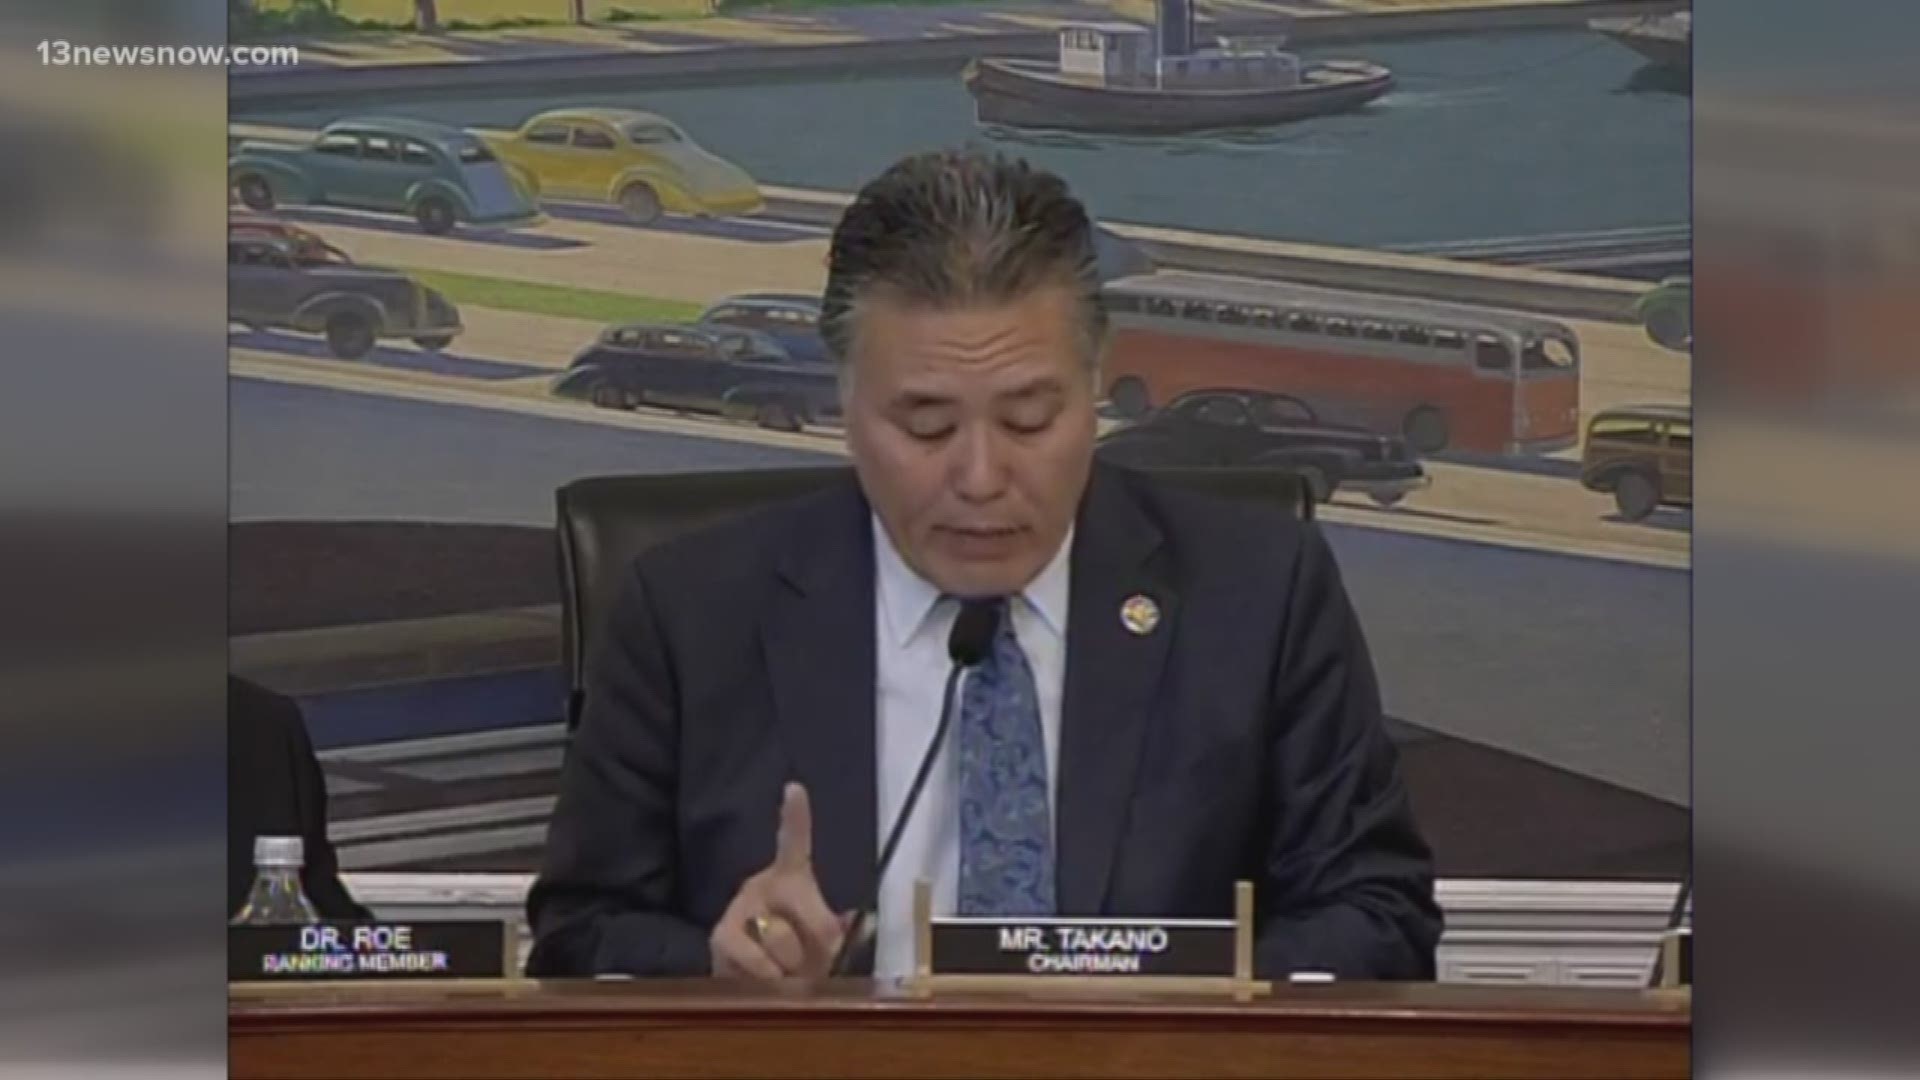 "This amendment brings approximately 2,500 V.A. home loans into good standing so that veterans in the process of refinancing their homes are not forced to refinance at a higher rate," said committee chairman Mr. Takano.